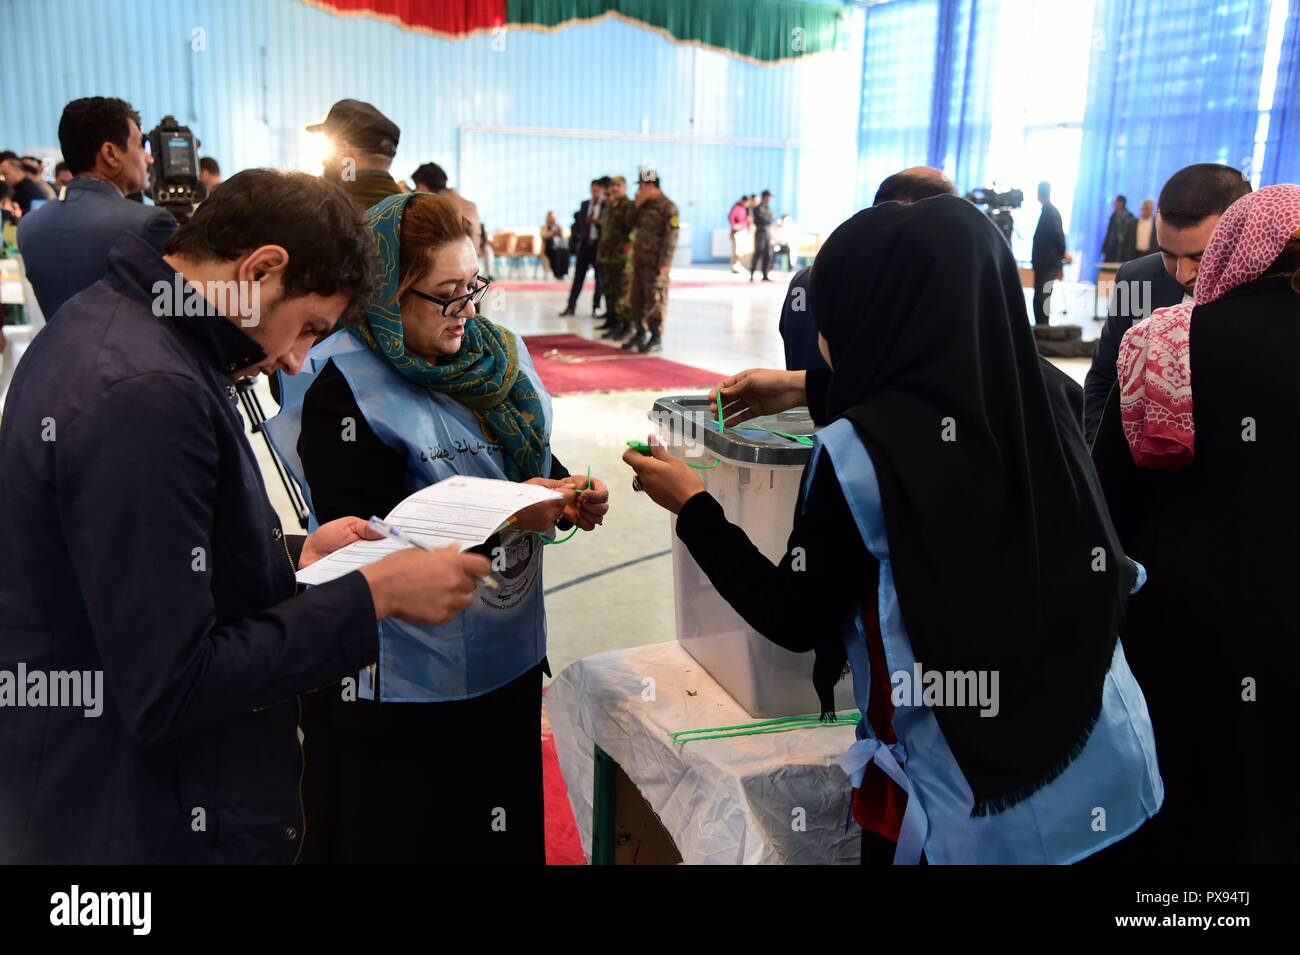 Kabul, Afghanistan. 20th Oct, 2018. Staff work at a polling center during parliamentary elections in Kabul, Afghanistan, Oct. 20, 2018. Millions of Afghan voters cast their ballots on Saturday for long-delayed parliamentary elections in the militancy-plagued country amid reports of security threats and irregularities. Credit: Dai He/Xinhua/Alamy Live News Stock Photo